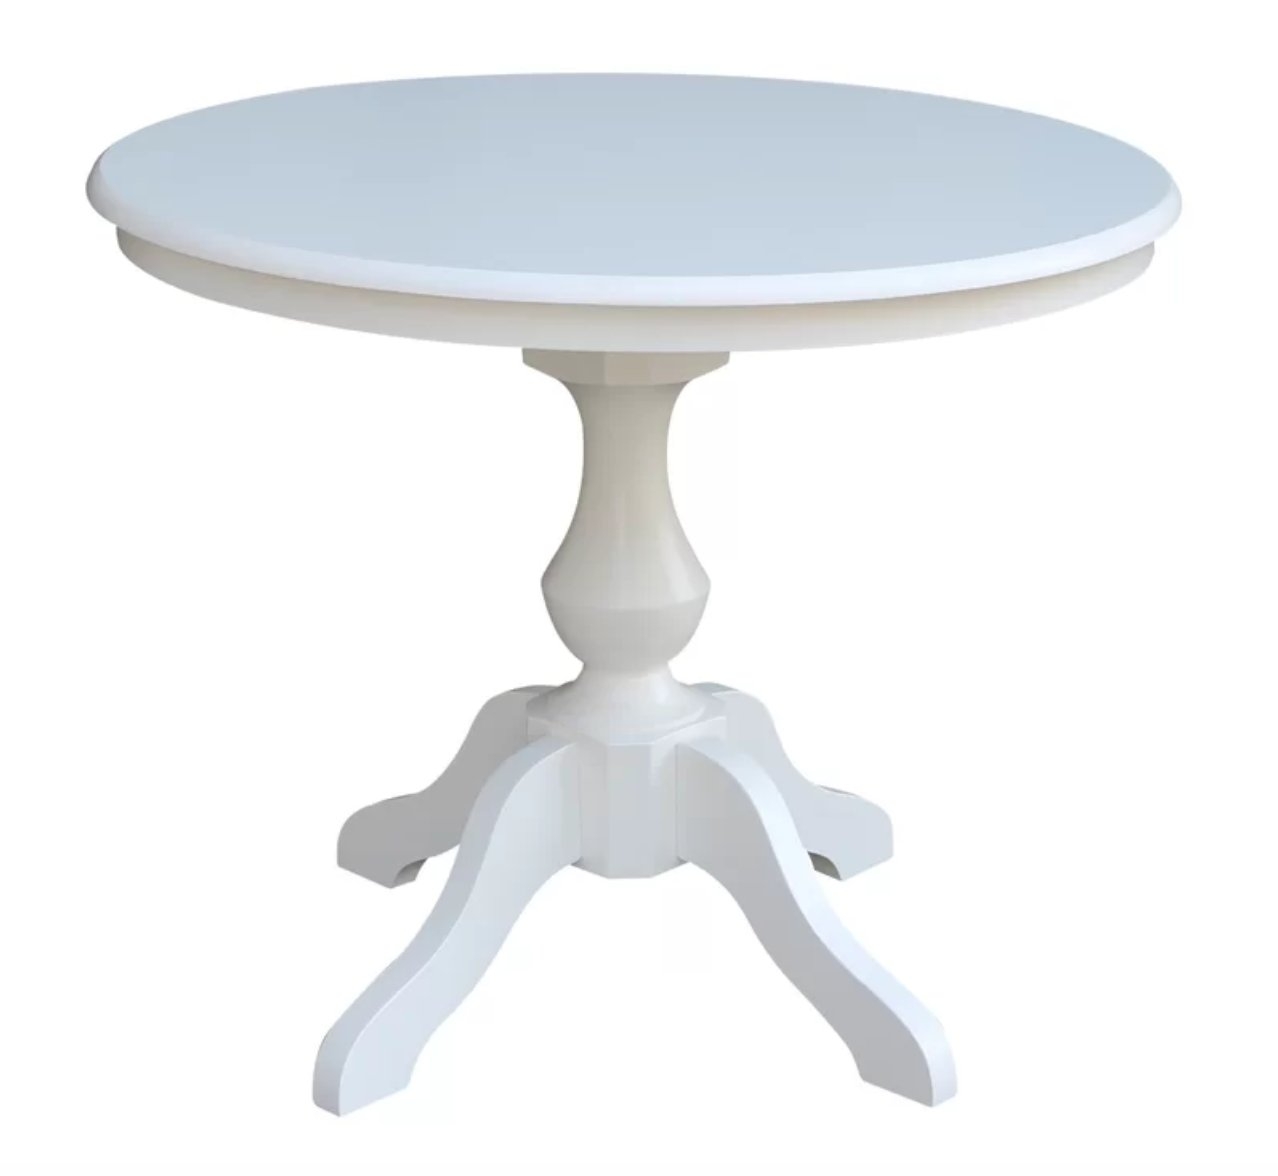 Jane Street Solid Wood Dining Table - Image 0